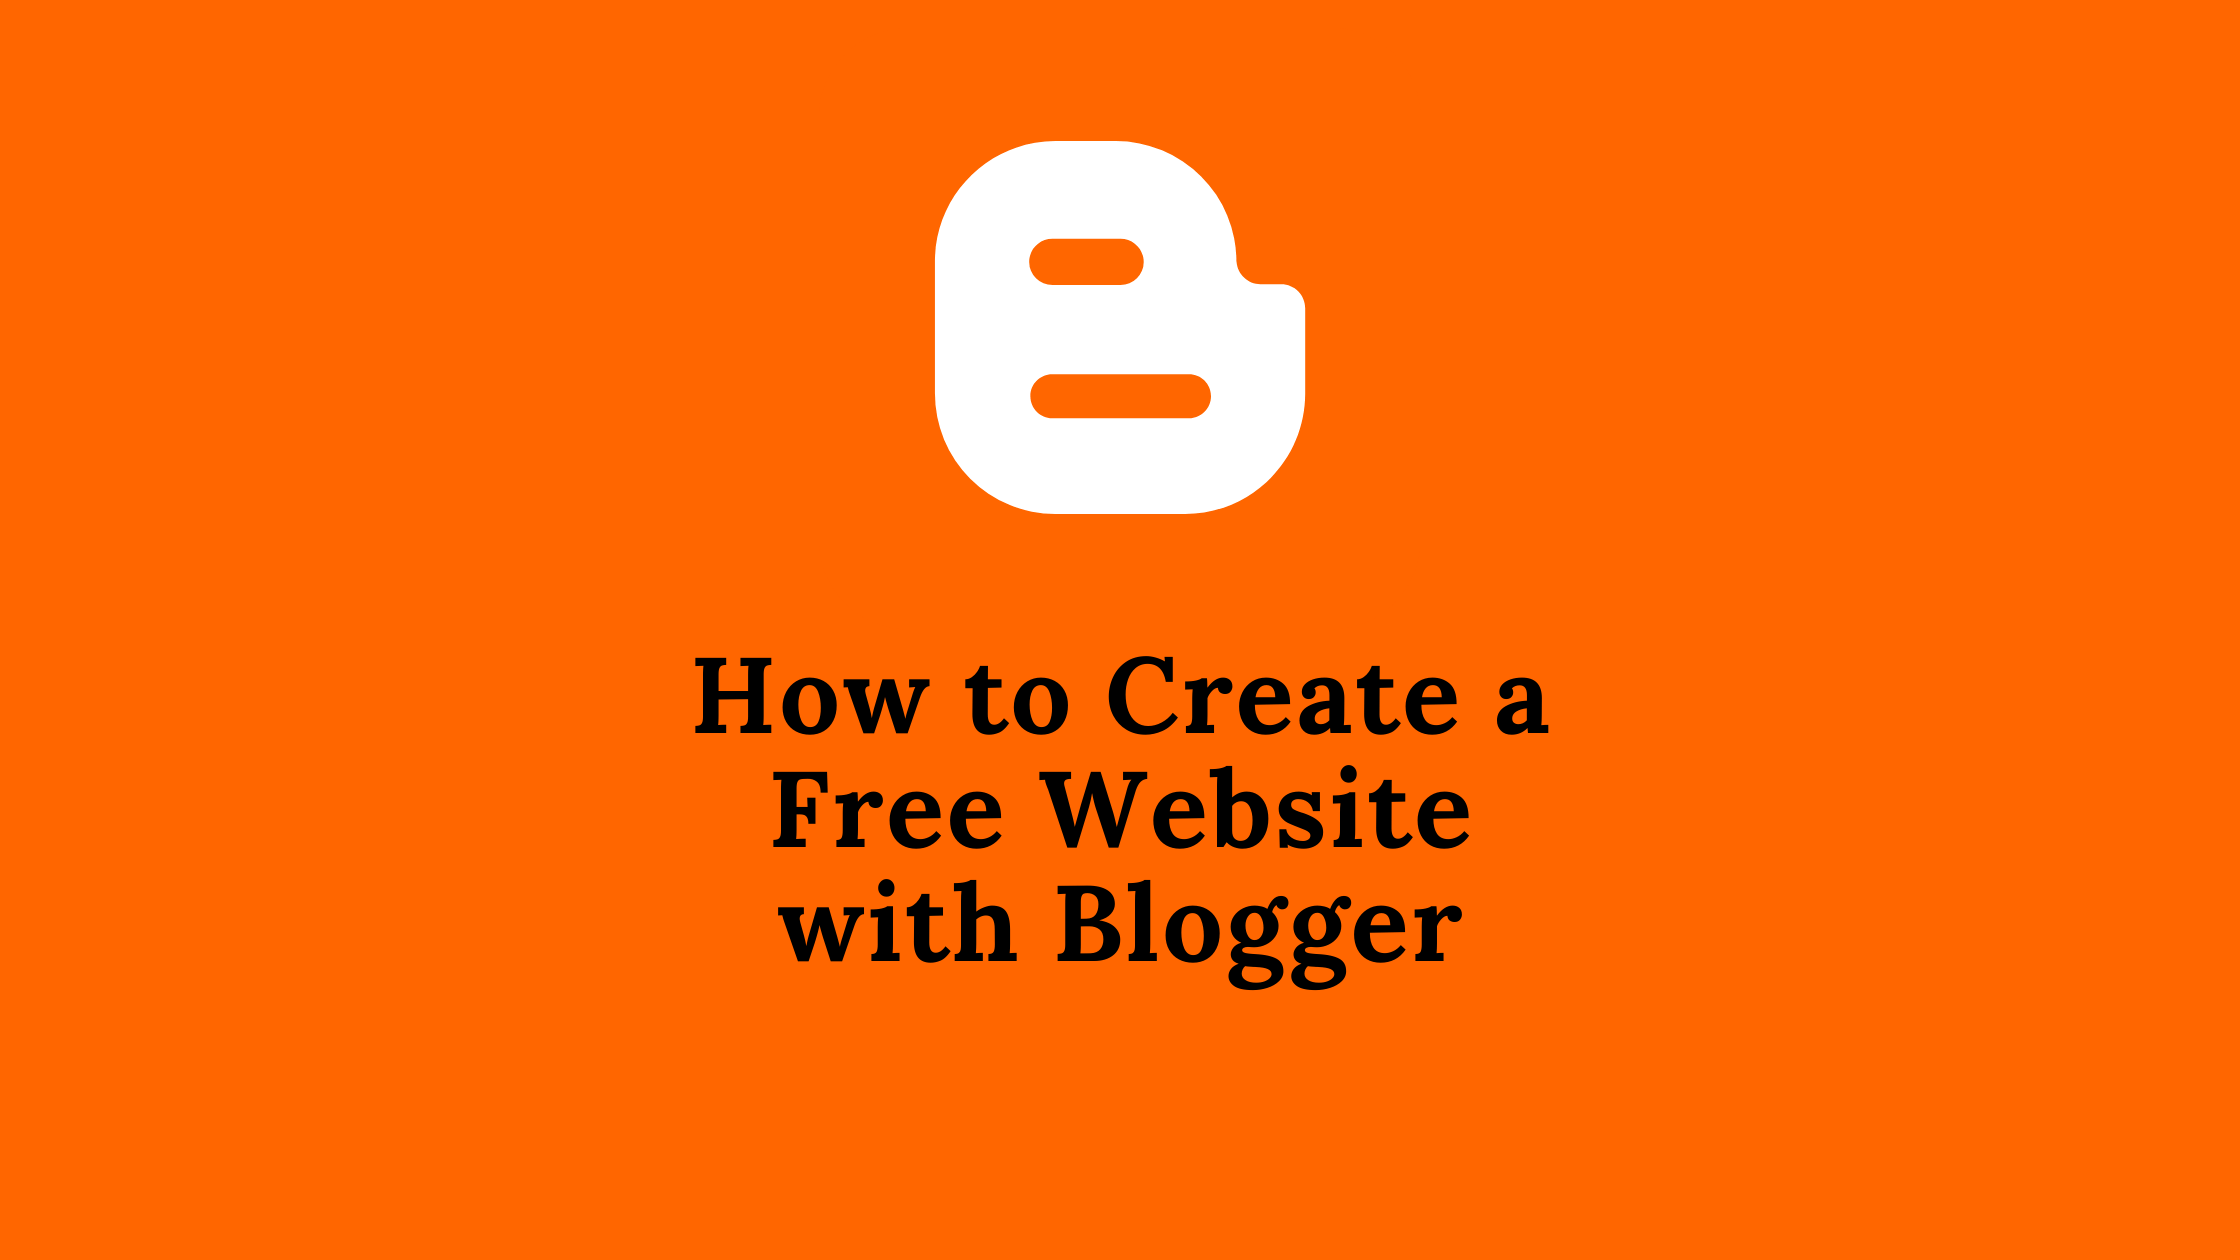 How to Create a Free Website with Blogger